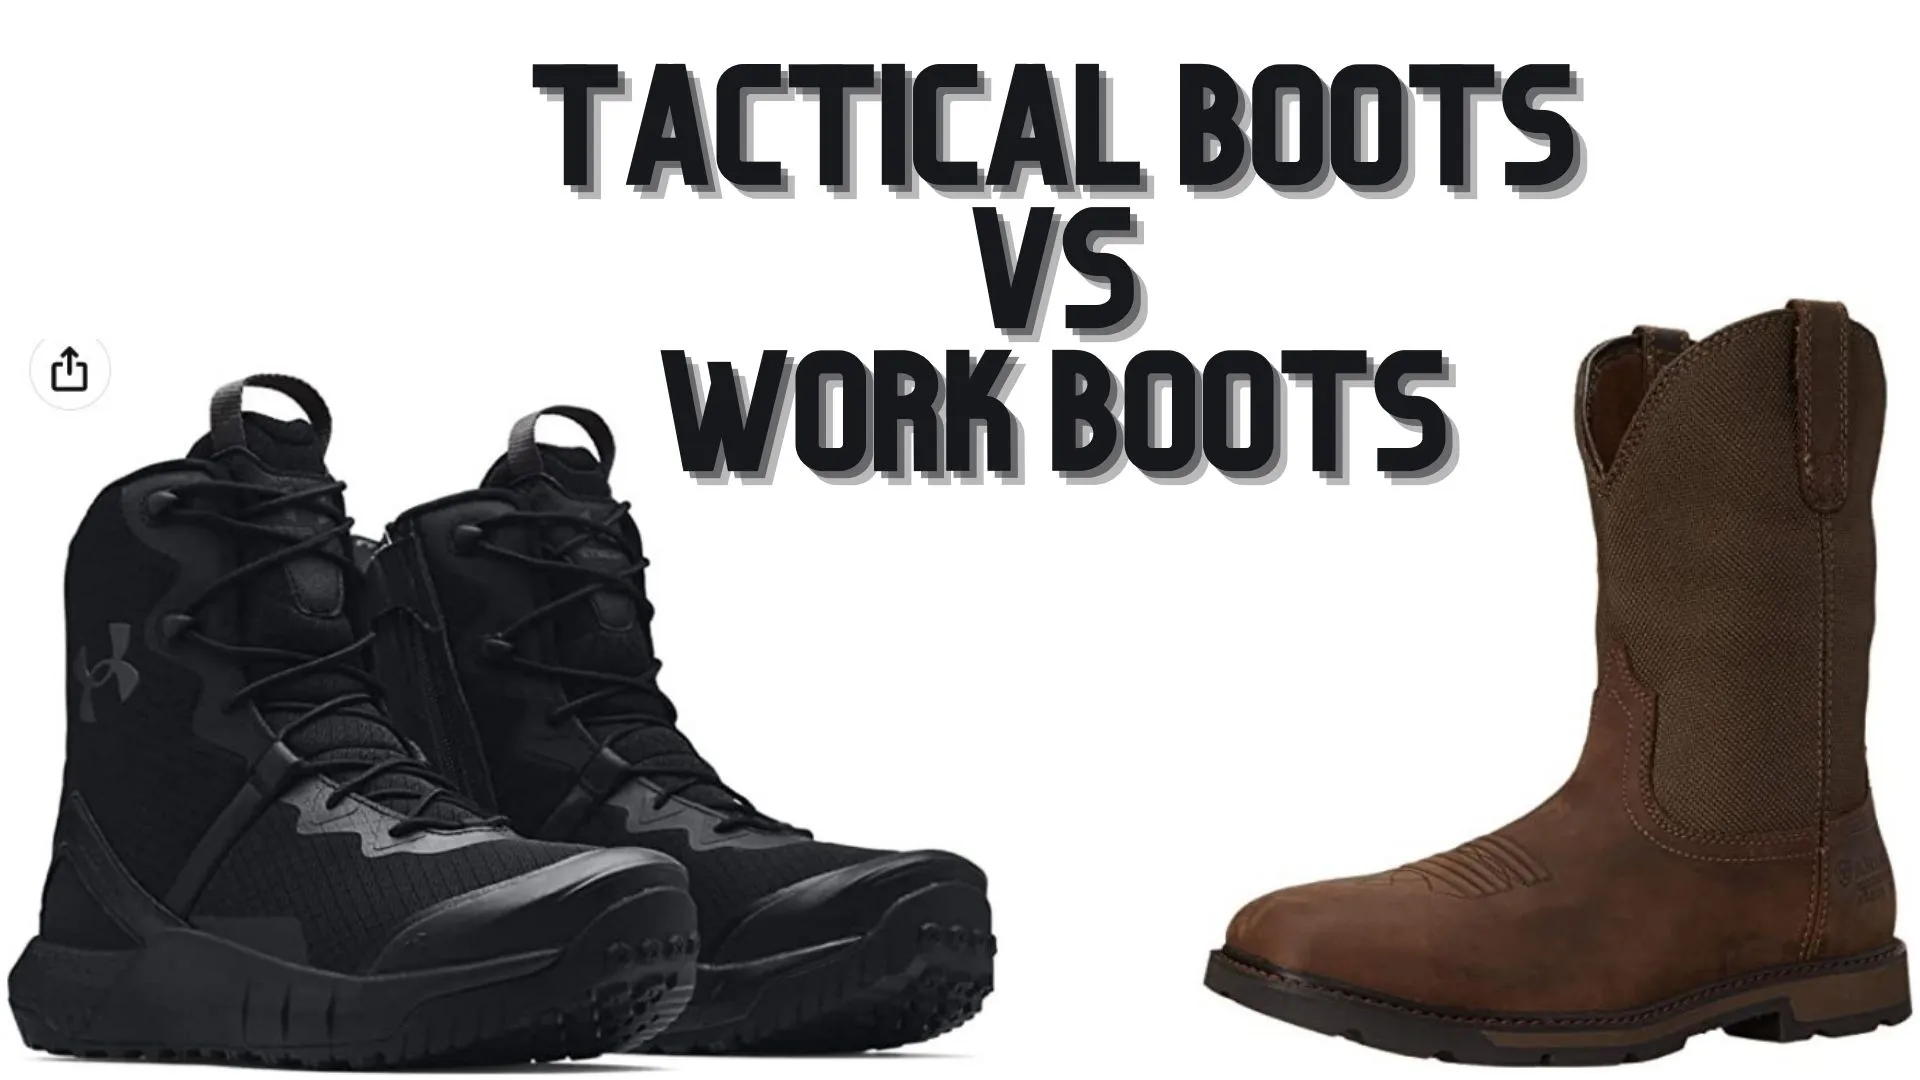 Tactical Boots vs Work Boots